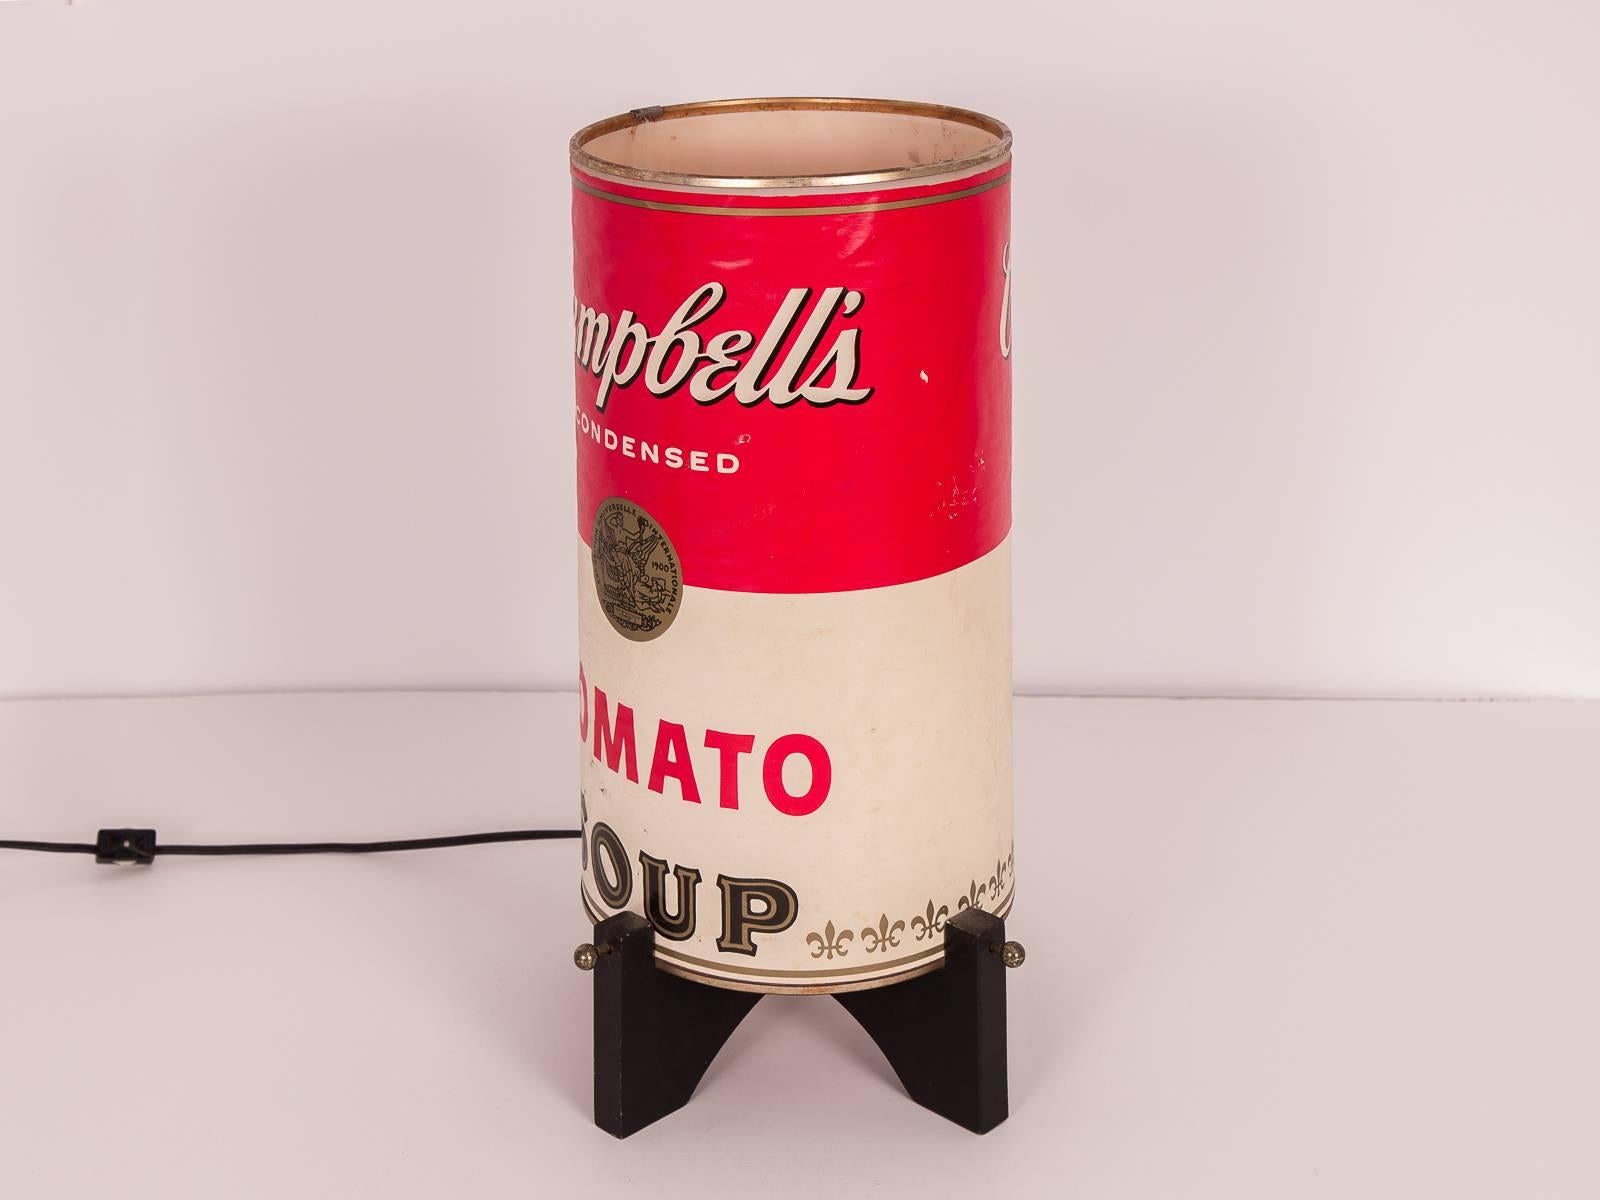 1970s vintage Campbell's soup can table lamp. The paper lampshade sports the Campbell's chicken noodle soup and tomato soup label on each side. A darling Pop Art heirloom. Lamp is in good condition, with some age-appropriate wear from being lovingly